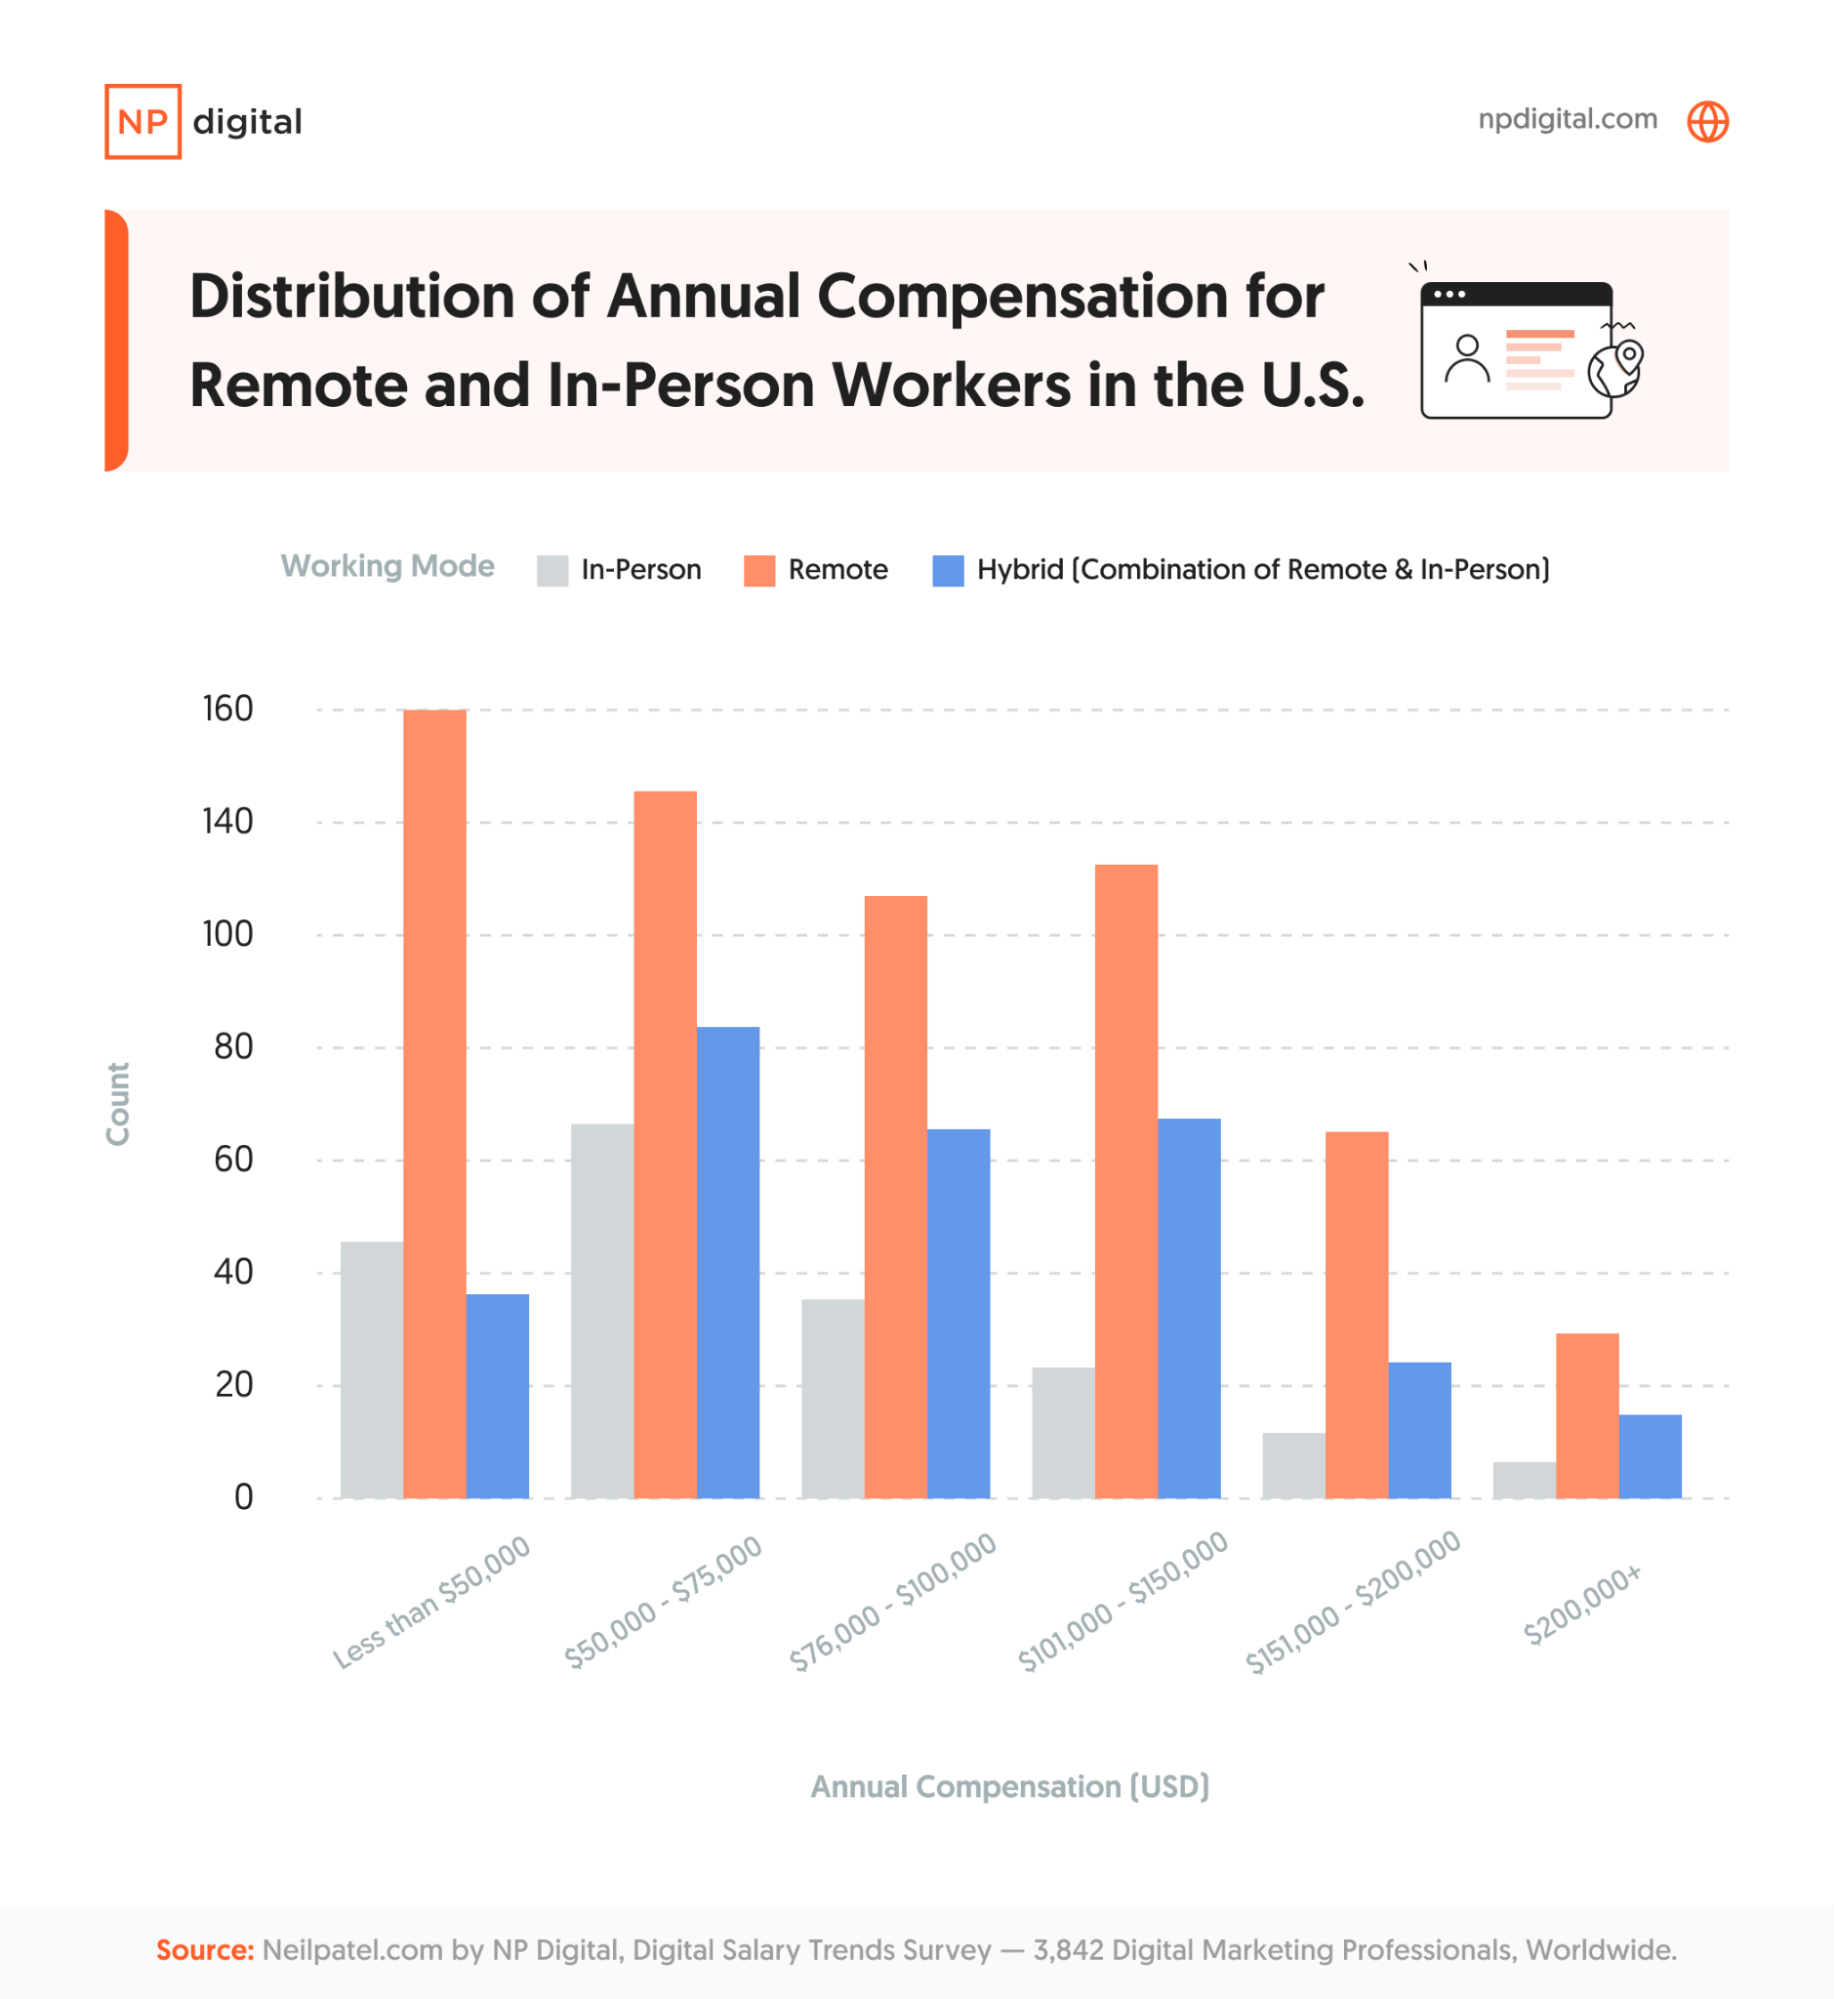 A bar chart breaking down compensation among work settings in the U.S.